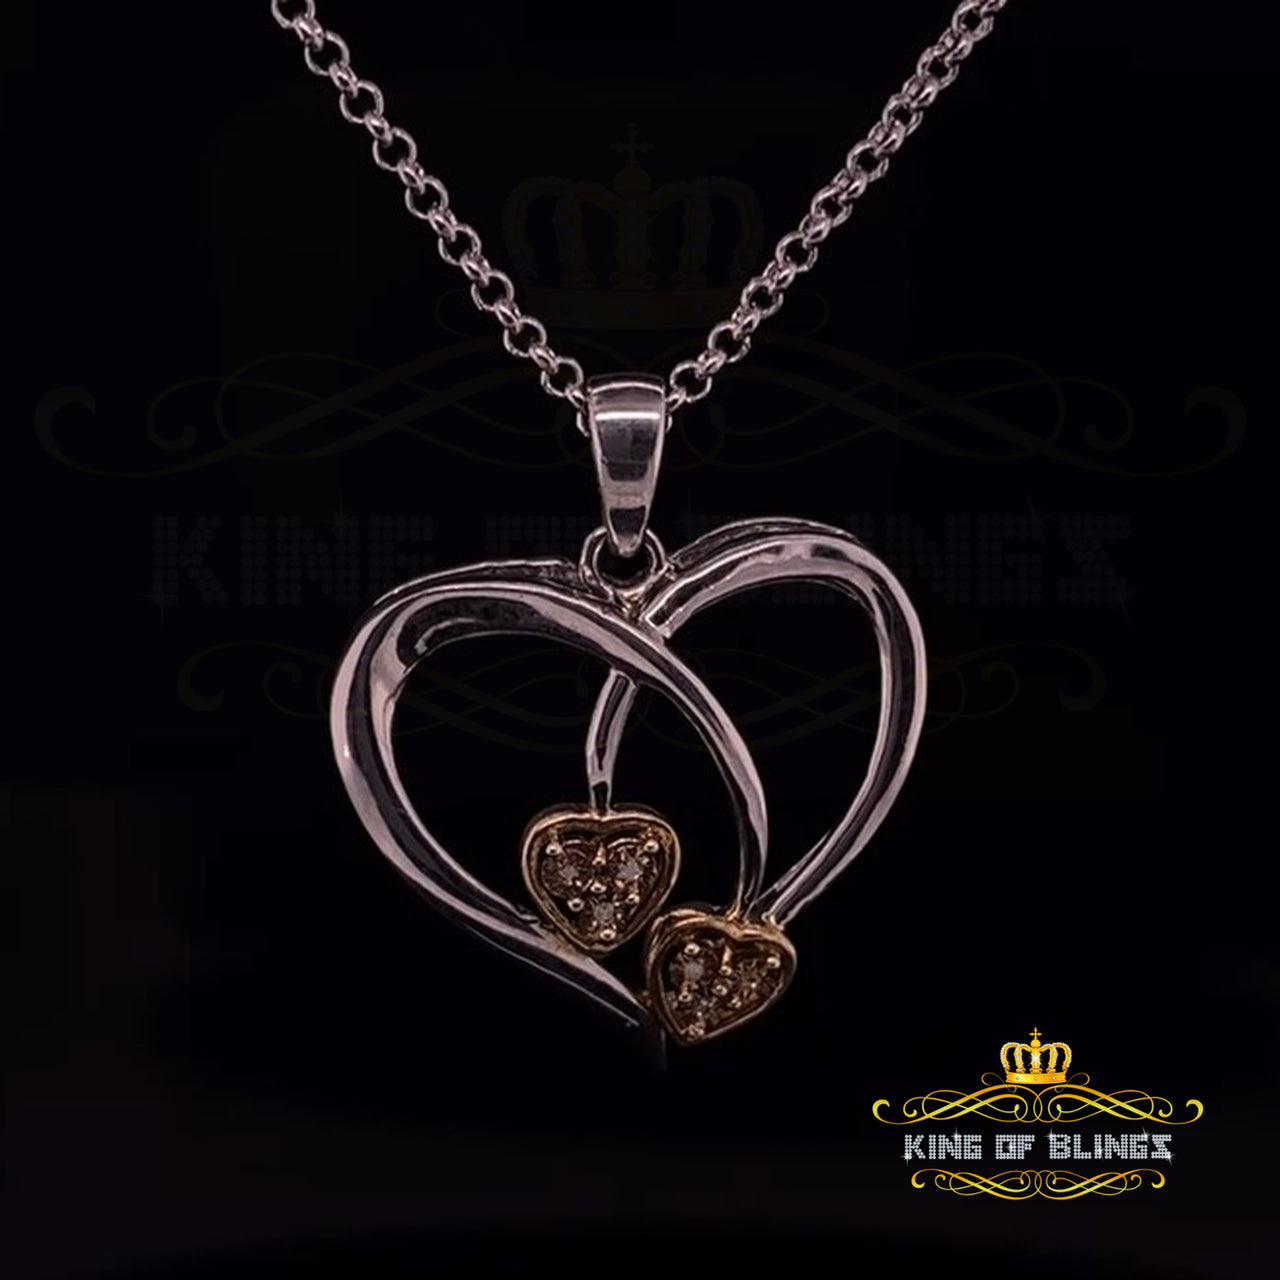 King Of Bling's 0.03CT Real Diamond Double HEART Sterling Silver with White Charm Necklace Pendant KING OF BLINGS